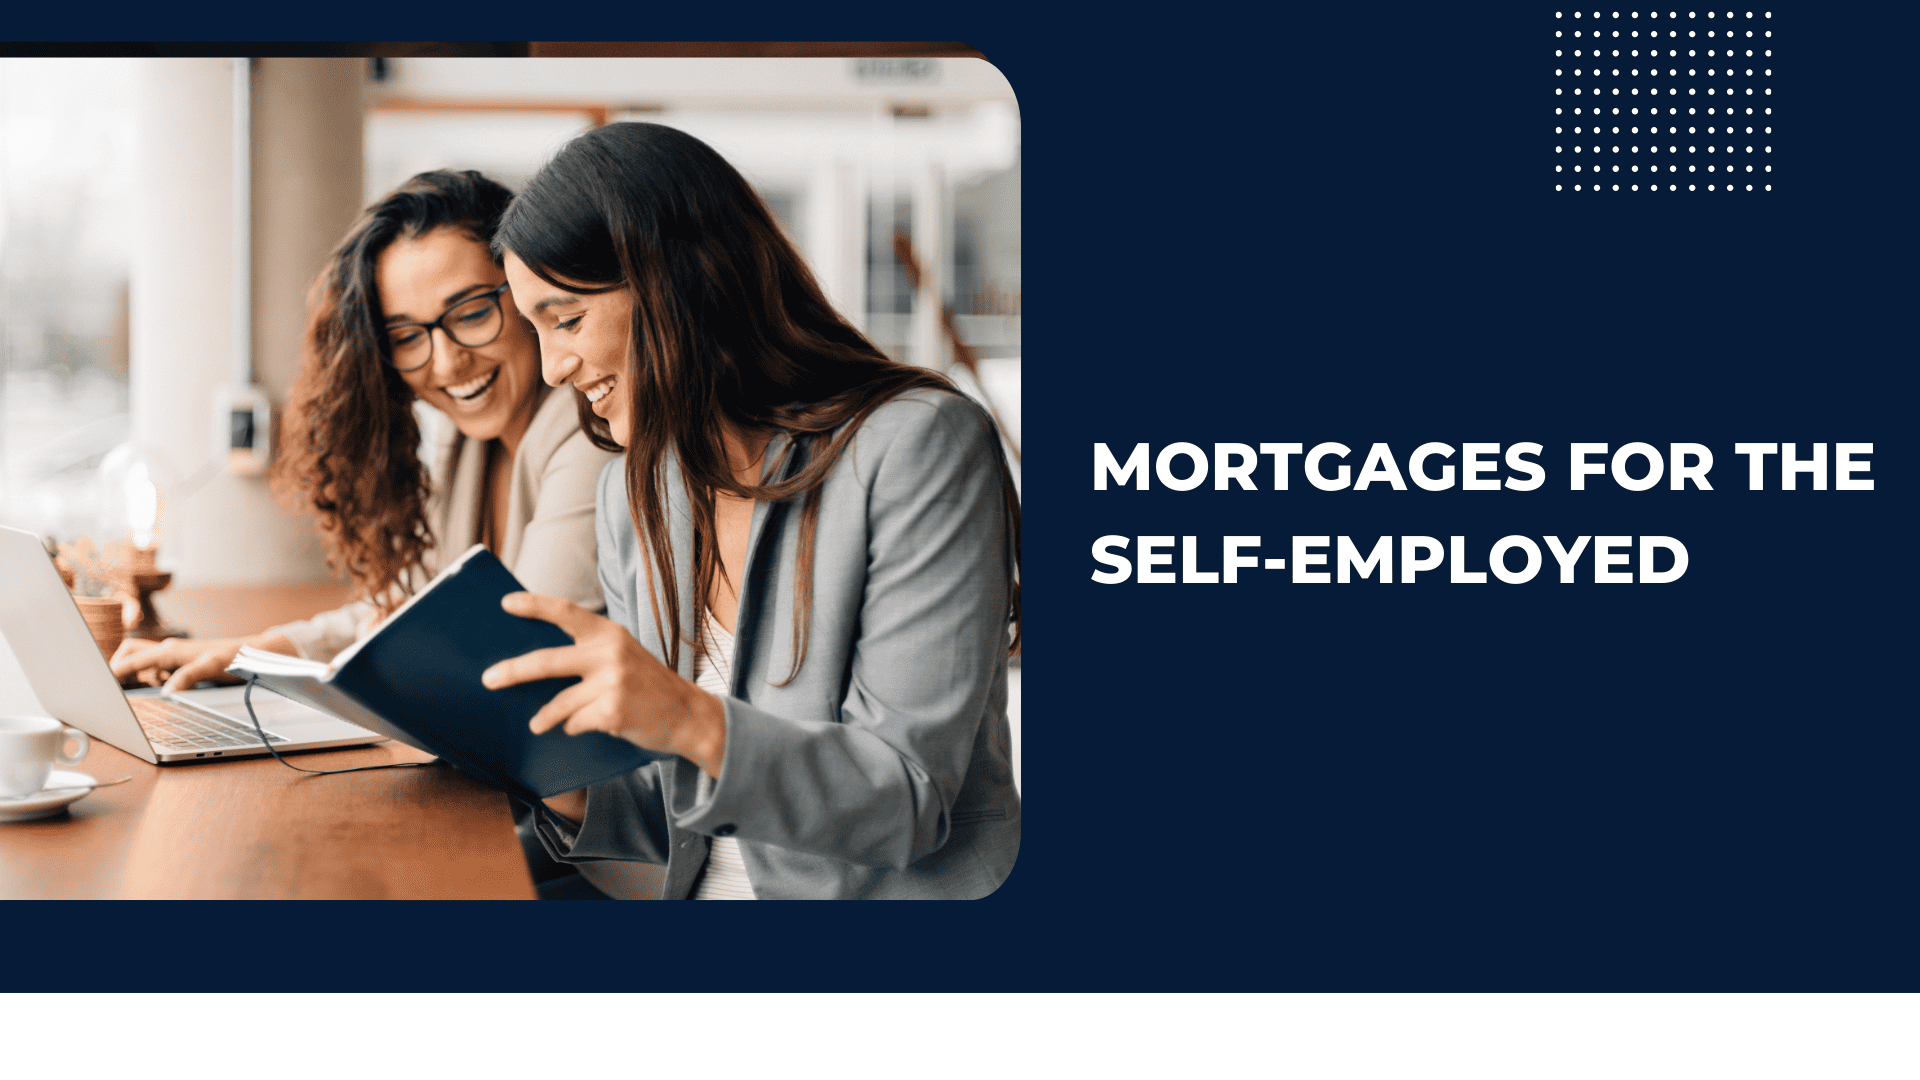 Mortgages For The Self-Employed - V2